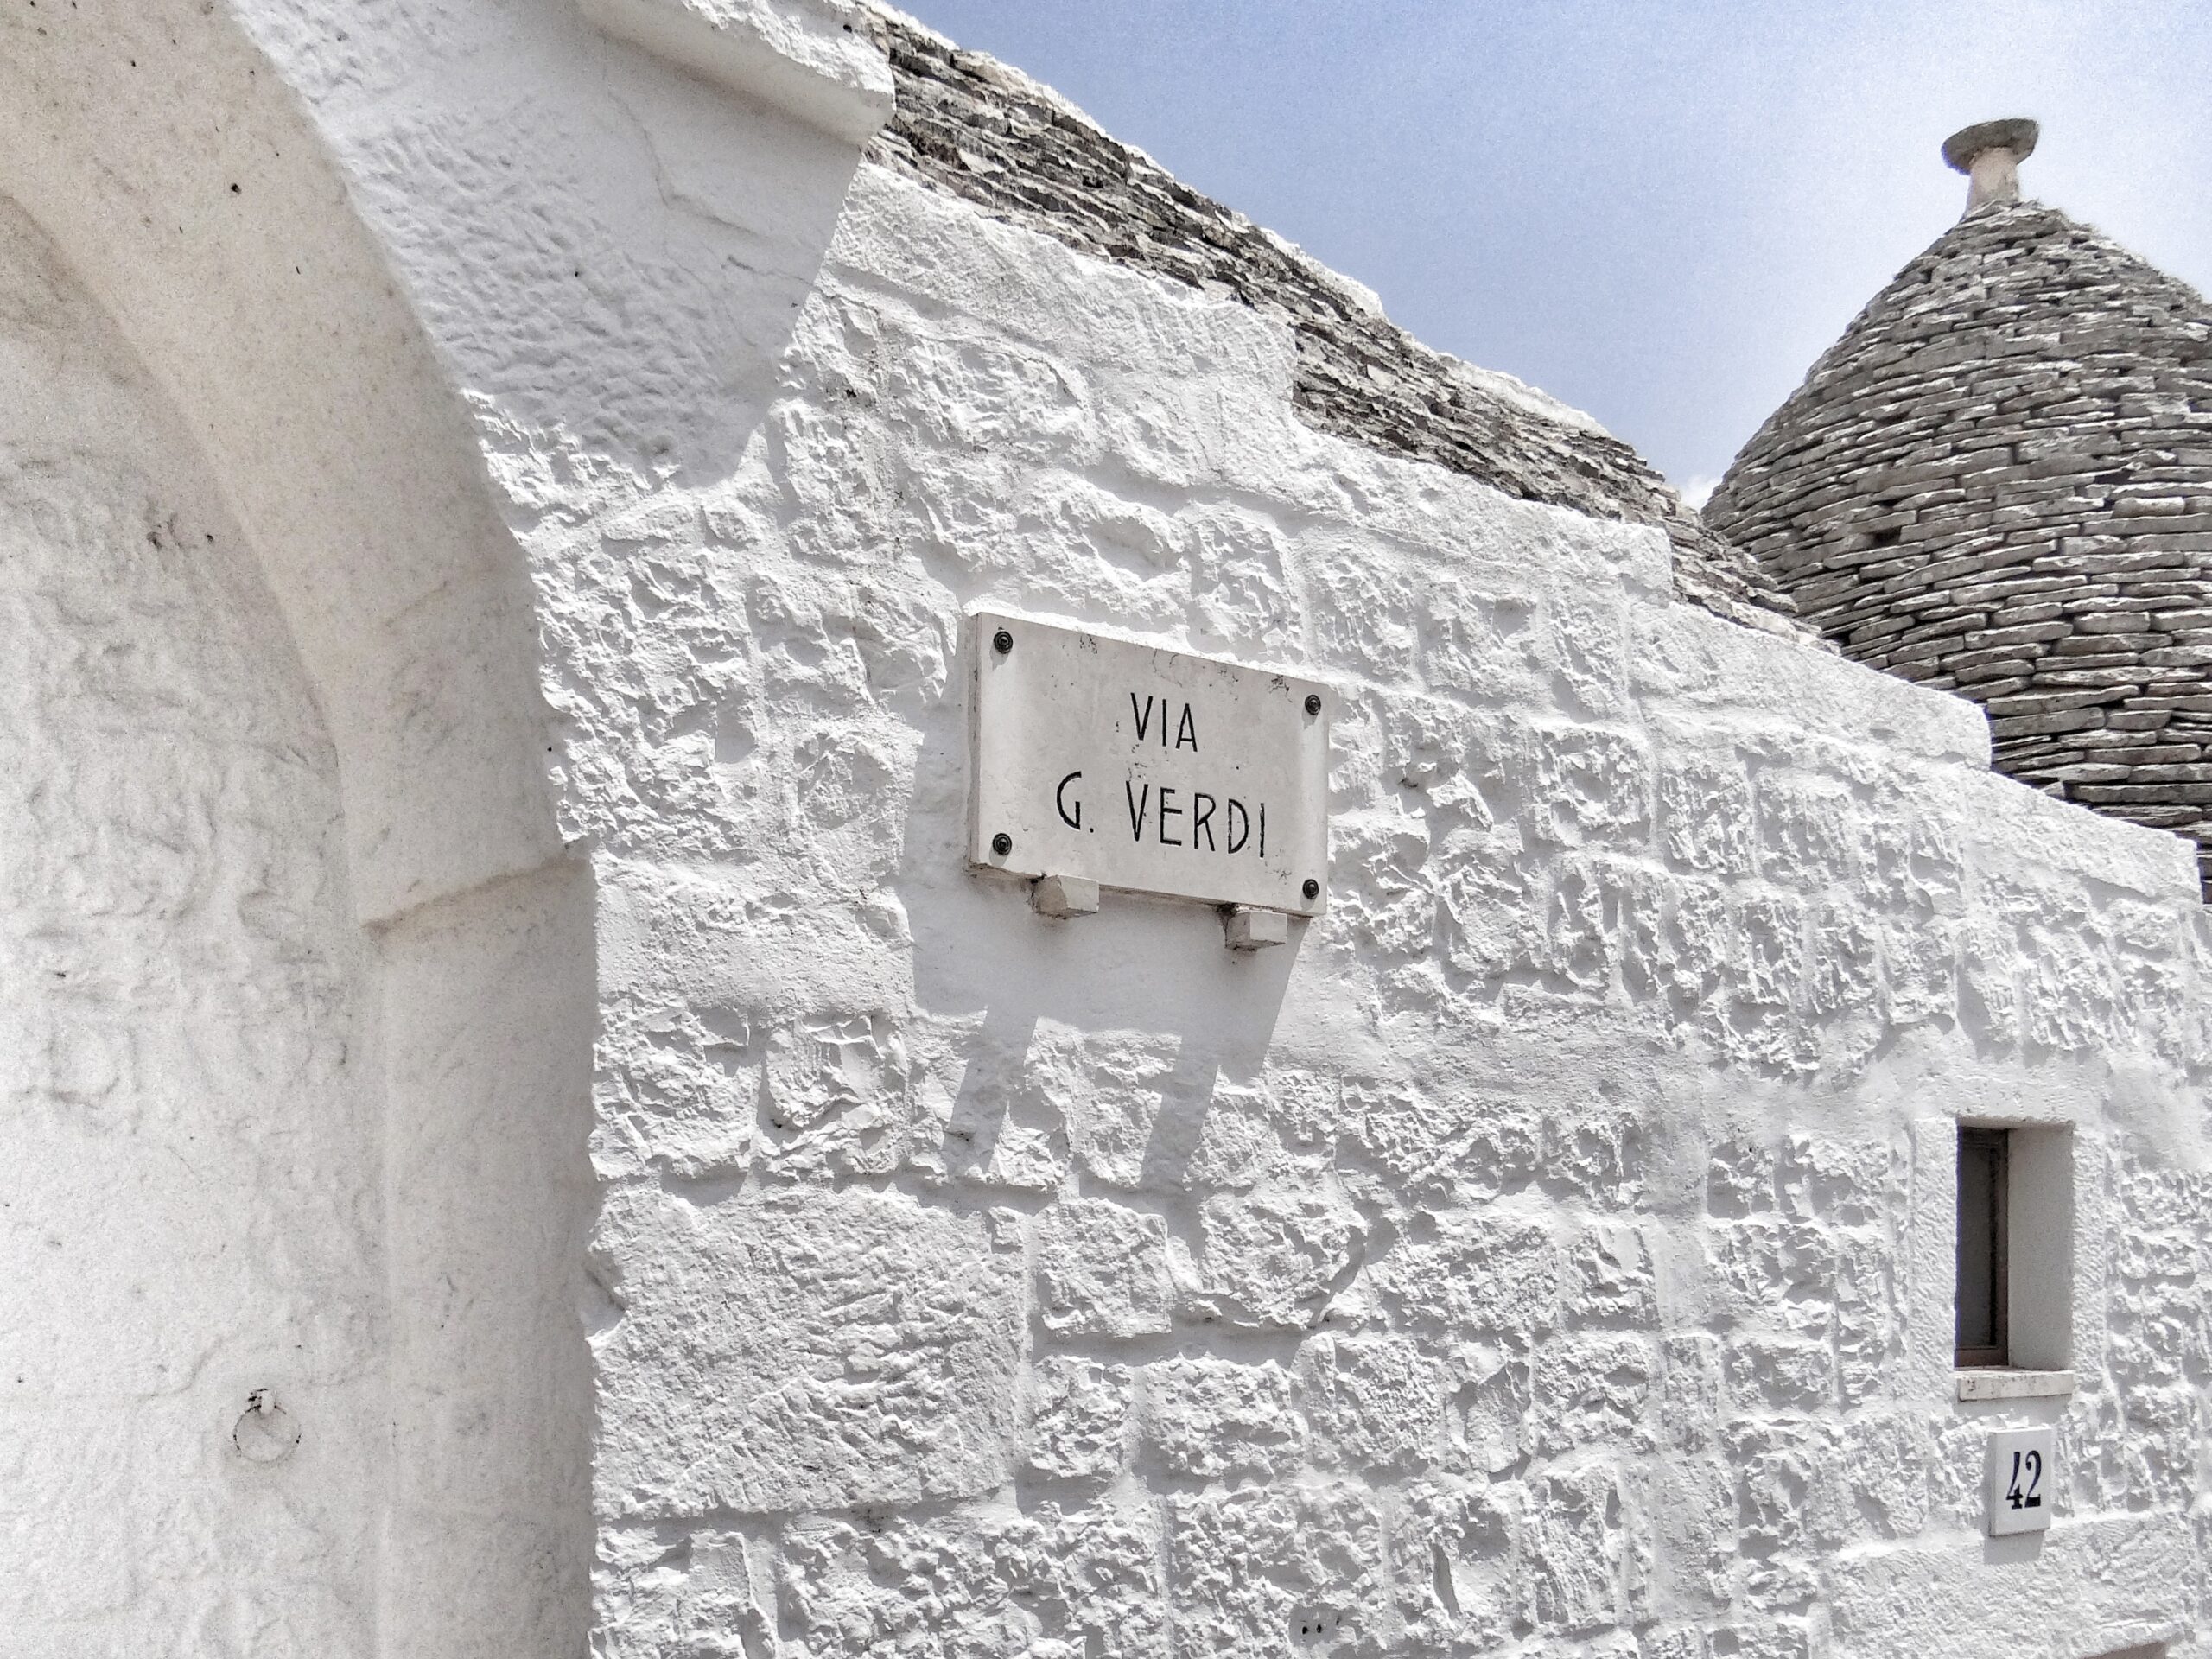 The wall of a dazzling white trullo in gay Puglia’s iconic Alberobello. The Big Gay Podcast from Puglia brings you their top tips for making the most of your visit to Alberobello.